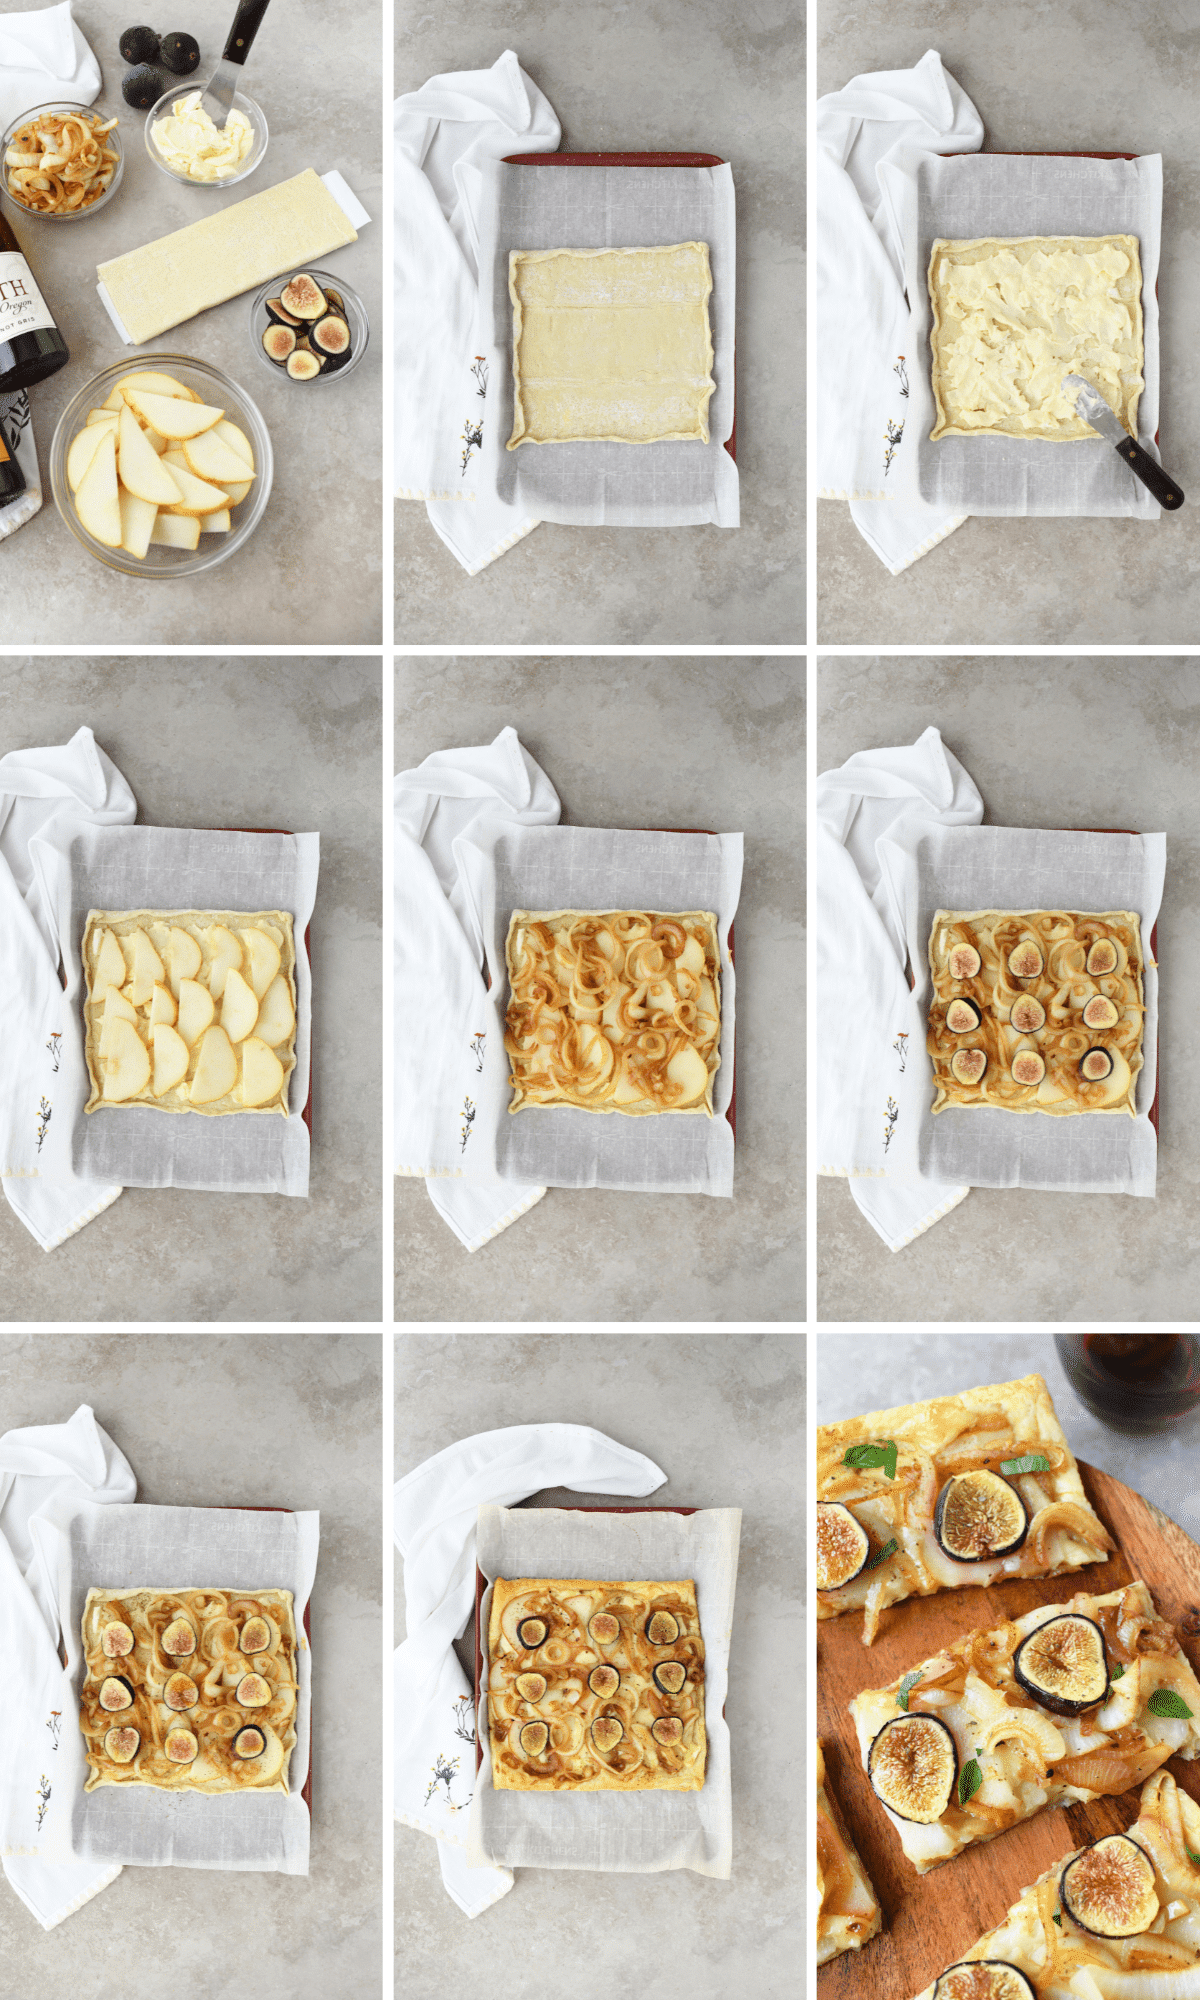 A nine block image of the steps to make a pear puff pastry.